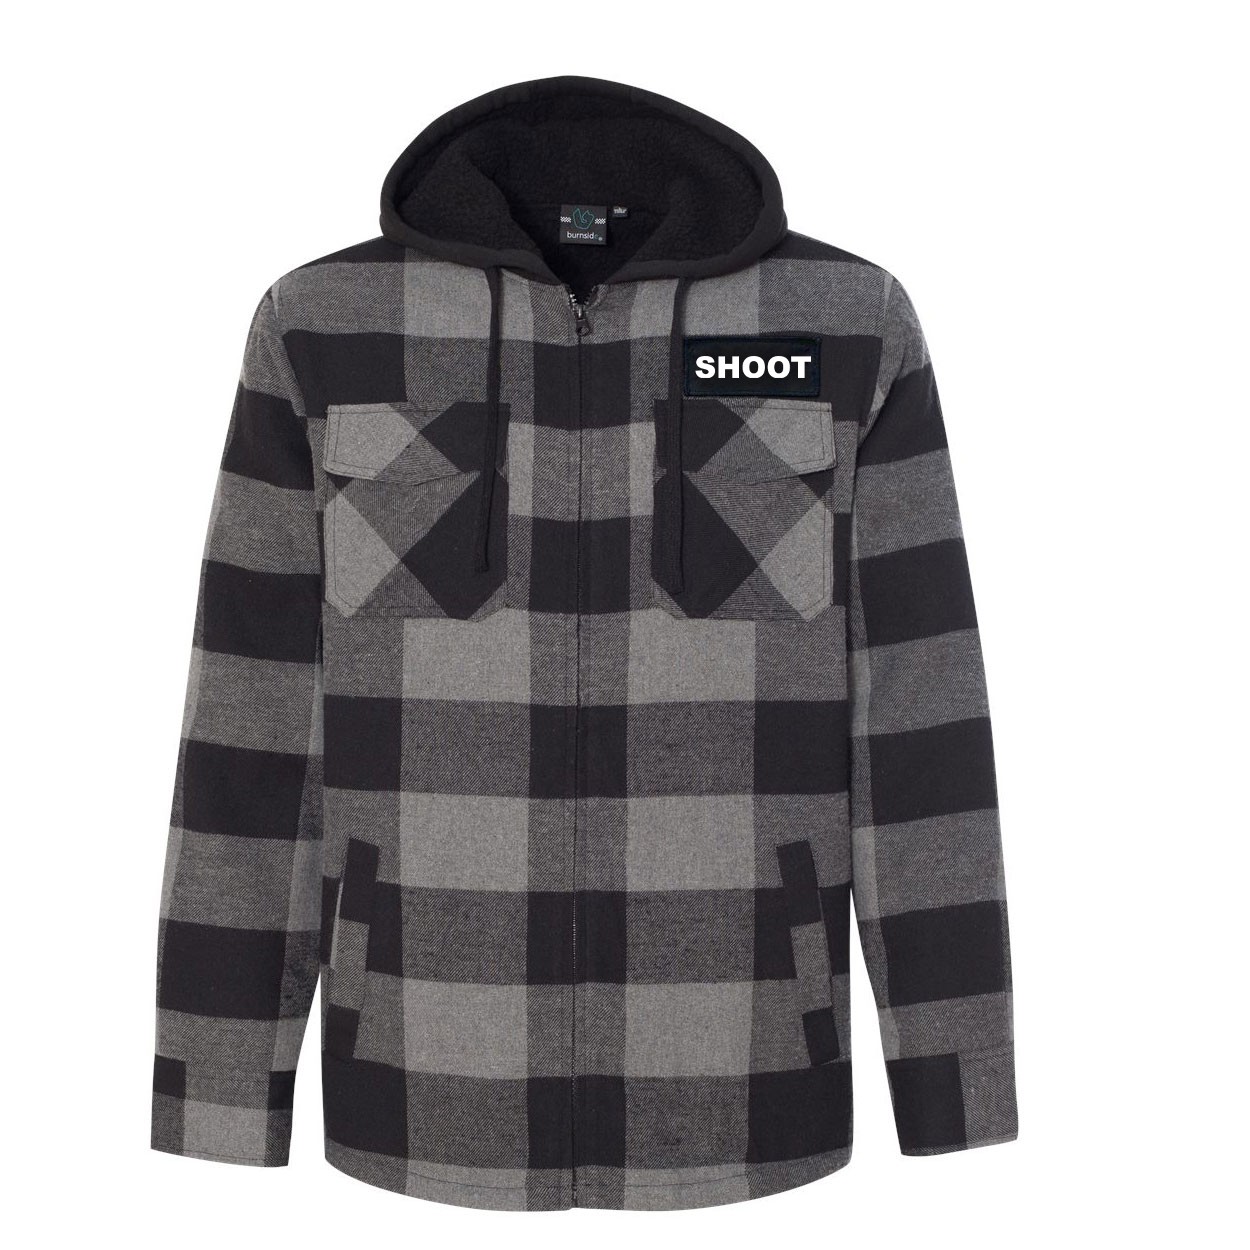 Shoot Brand Logo Classic Unisex Full Zip Woven Patch Hooded Flannel Jacket Black/Gray